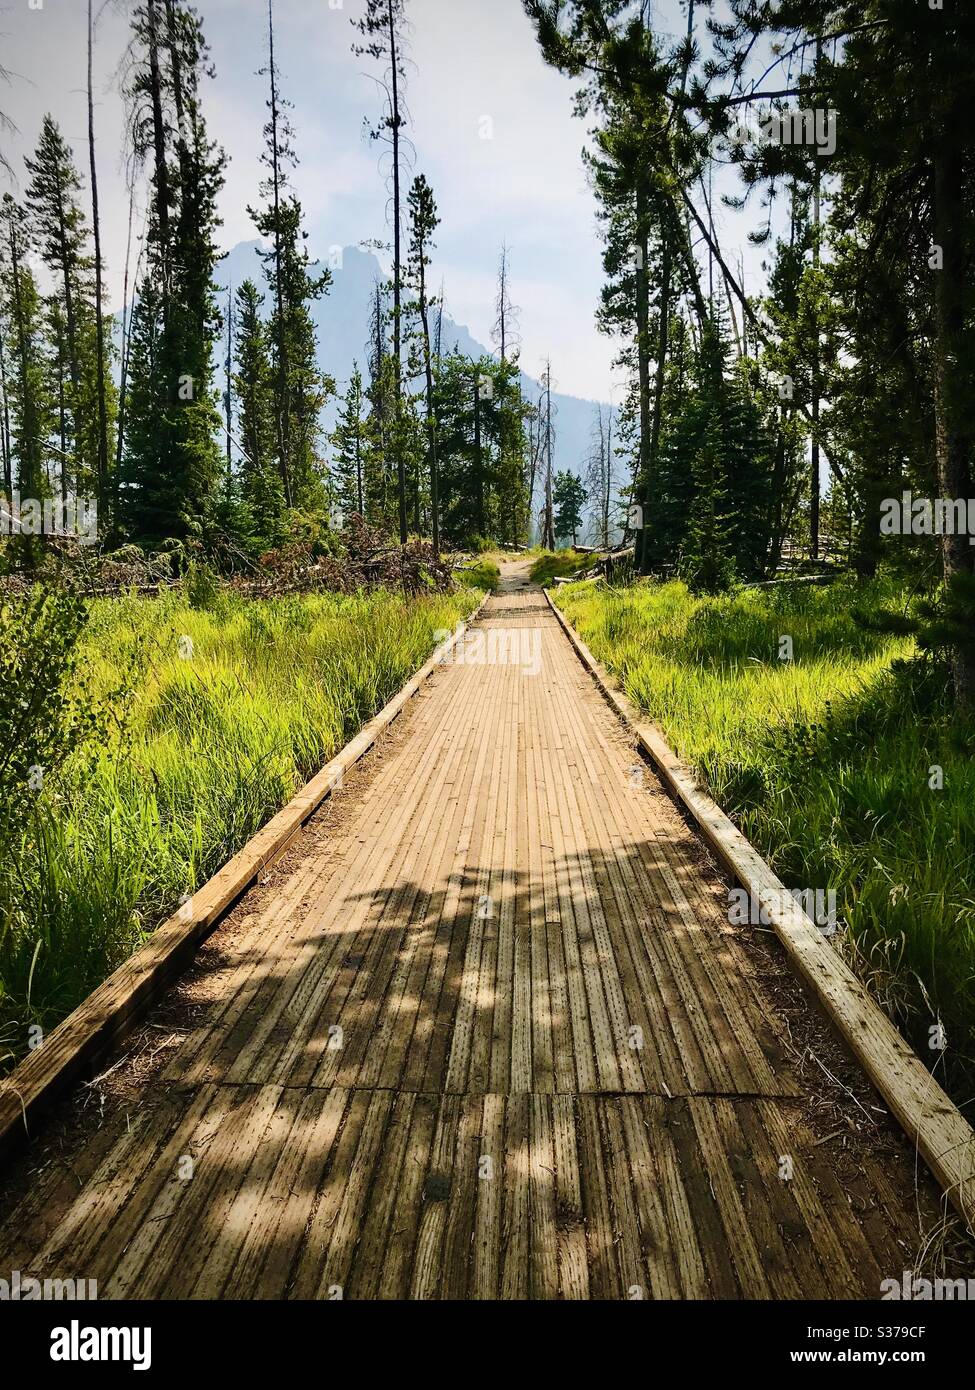 A wooden walkway path in the mountains. Stock Photo